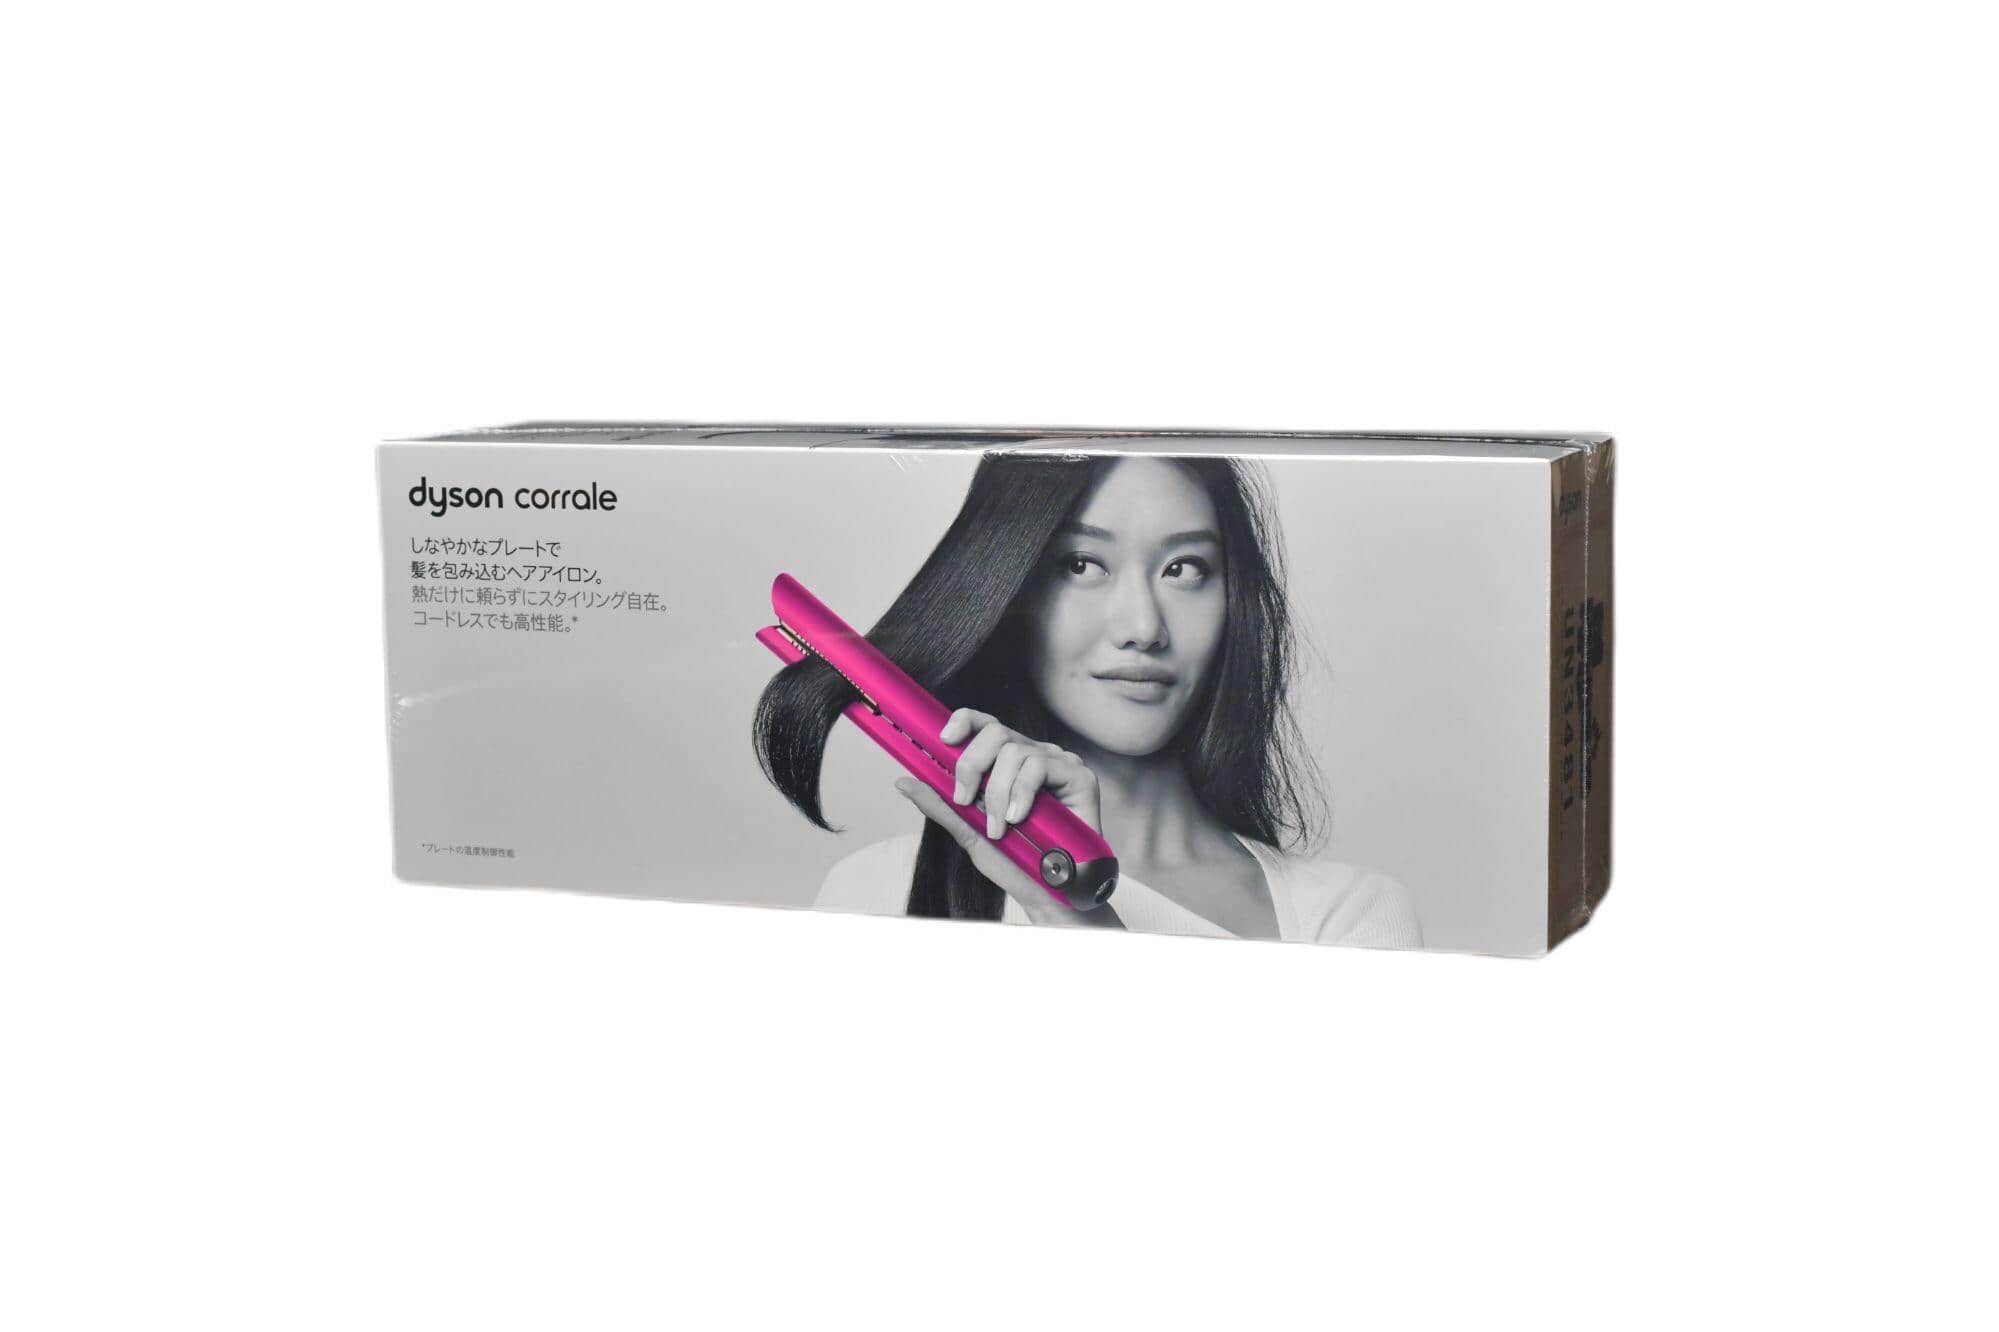 New]500 yen It is until whole country 12:00 for the Dyson Dyson Corrale [ HS03 FBN] Dyson choral (fuchsia blight nickel) Hair Iron hair care  -adaptive - BE FORWARD Store